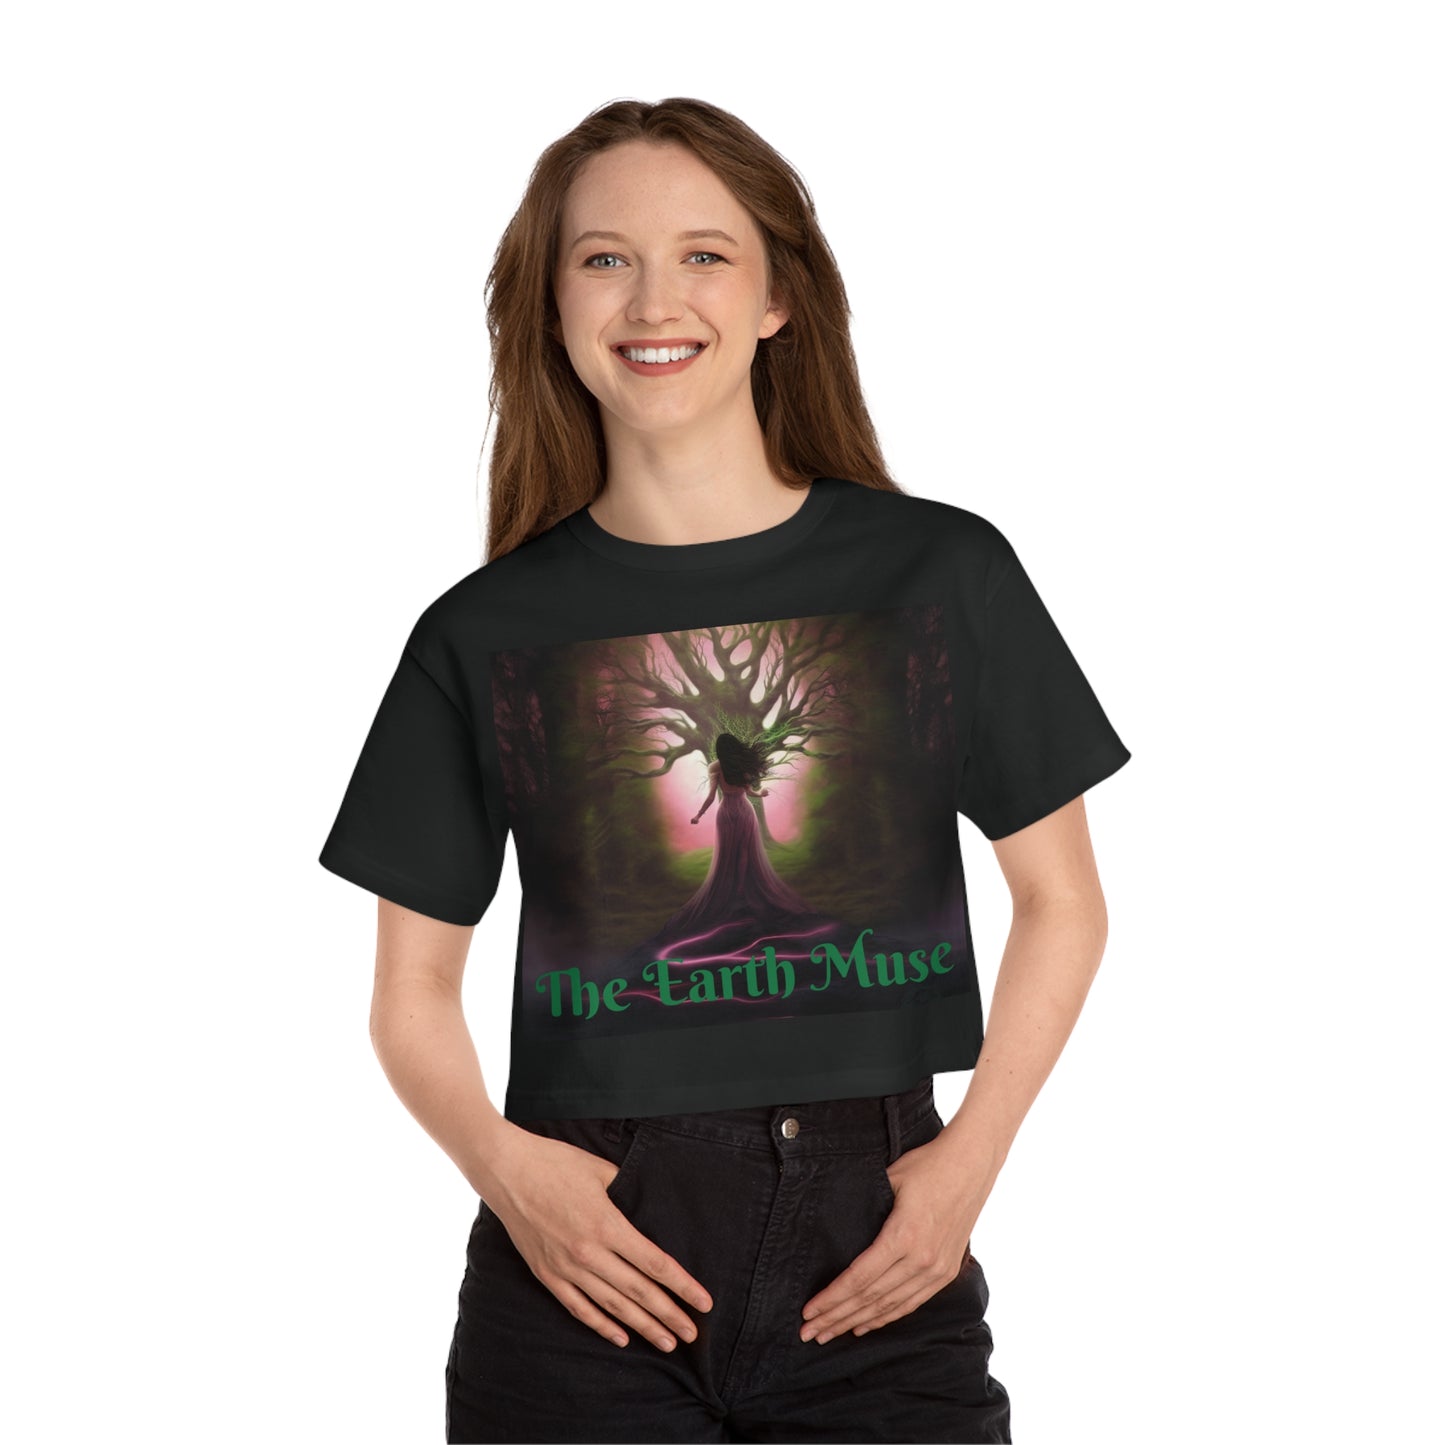 The Earth Muse Champion Women's Heritage Cropped T-Shirt